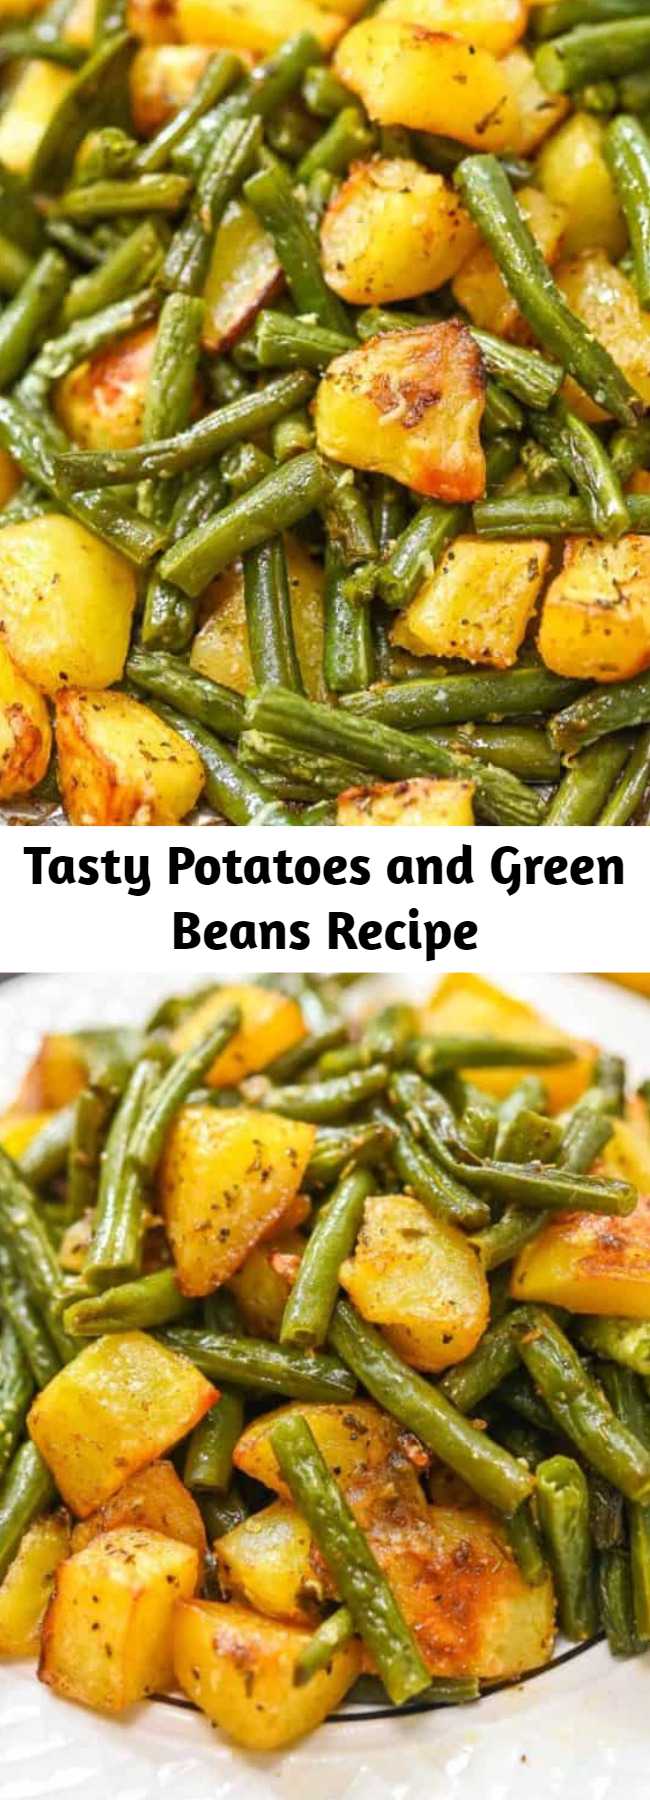 Tasty Potatoes and Green Beans Recipe - These Potatoes and Green Beans are a tasty side dish that you'll absolutely love. Made with garlic and flavorful seasonings, this oven-roasted veggie dish is delicious. #vegan #vegetarian #healthyrecipe #thanksgiving #potatoes #greenbeans #glutenfree